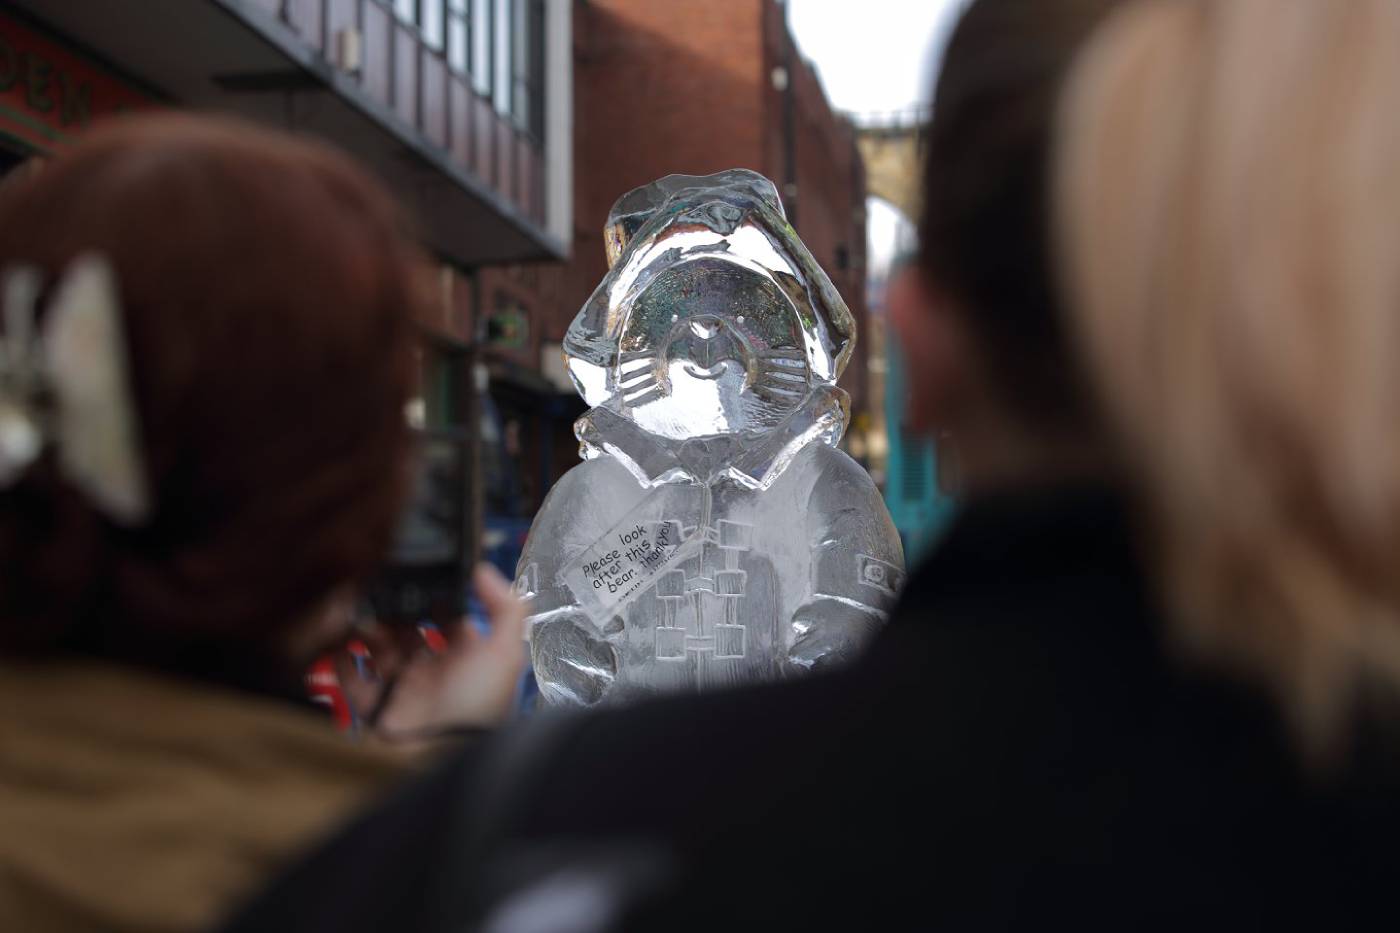 And the Durham Fire and Ice local hero sculpture for 2019 is...